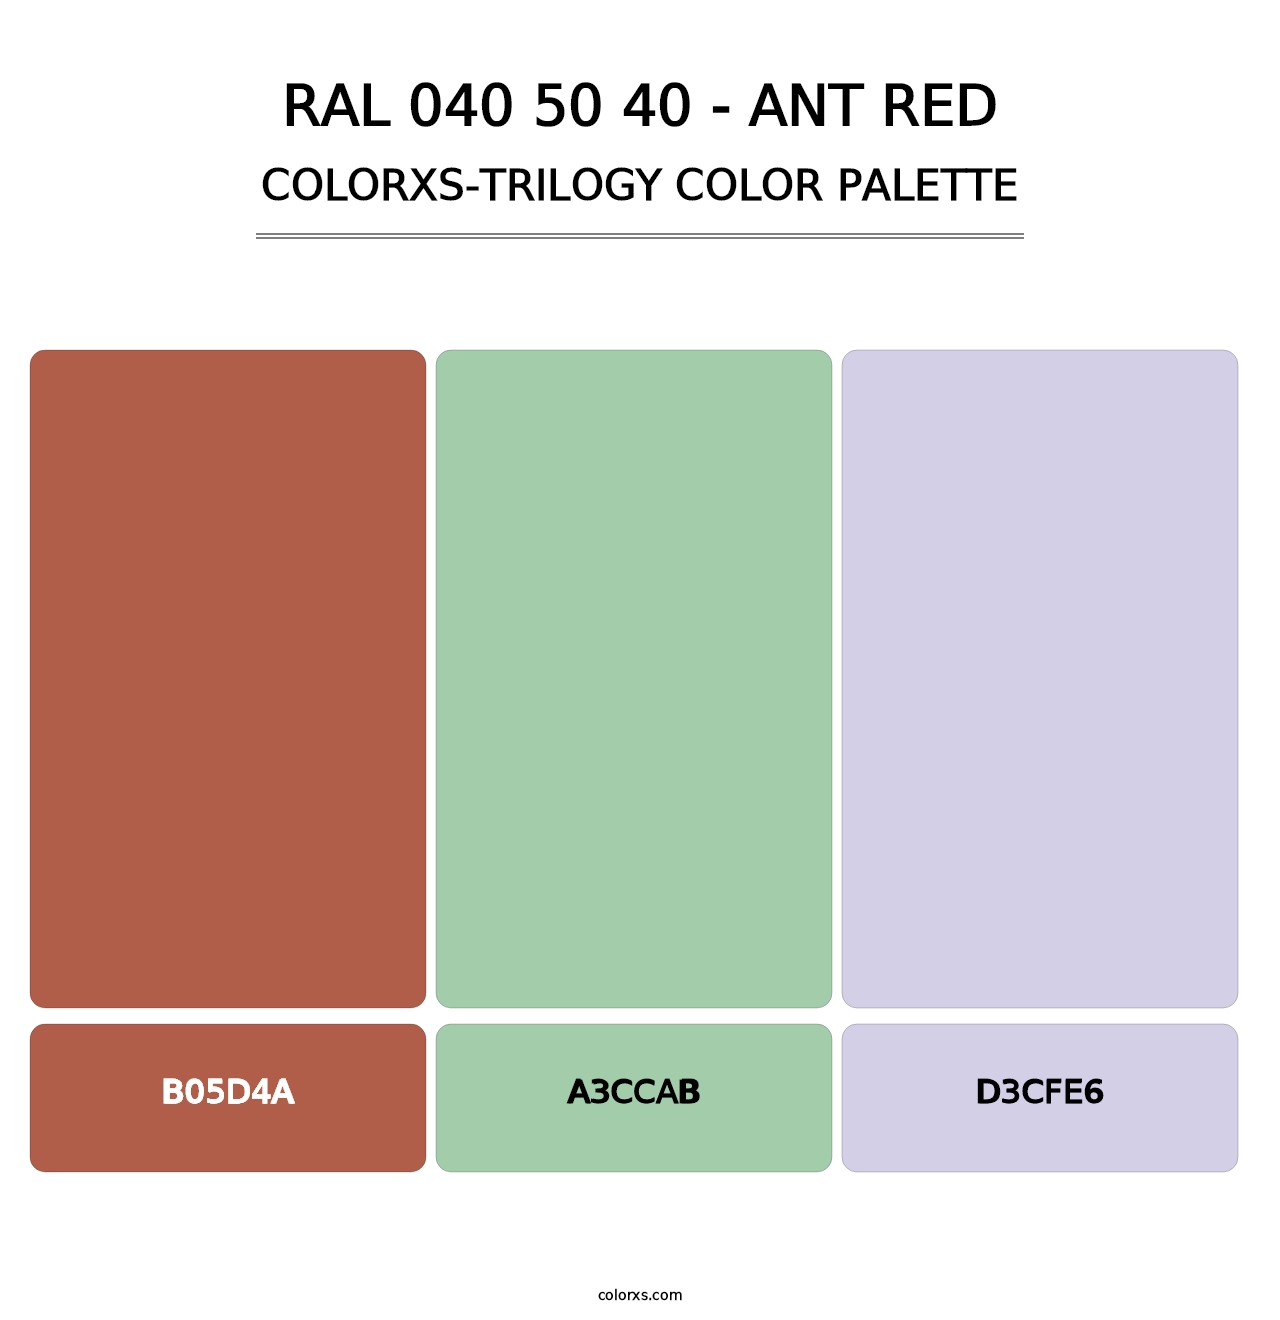 RAL 040 50 40 - Ant Red - Colorxs Trilogy Palette